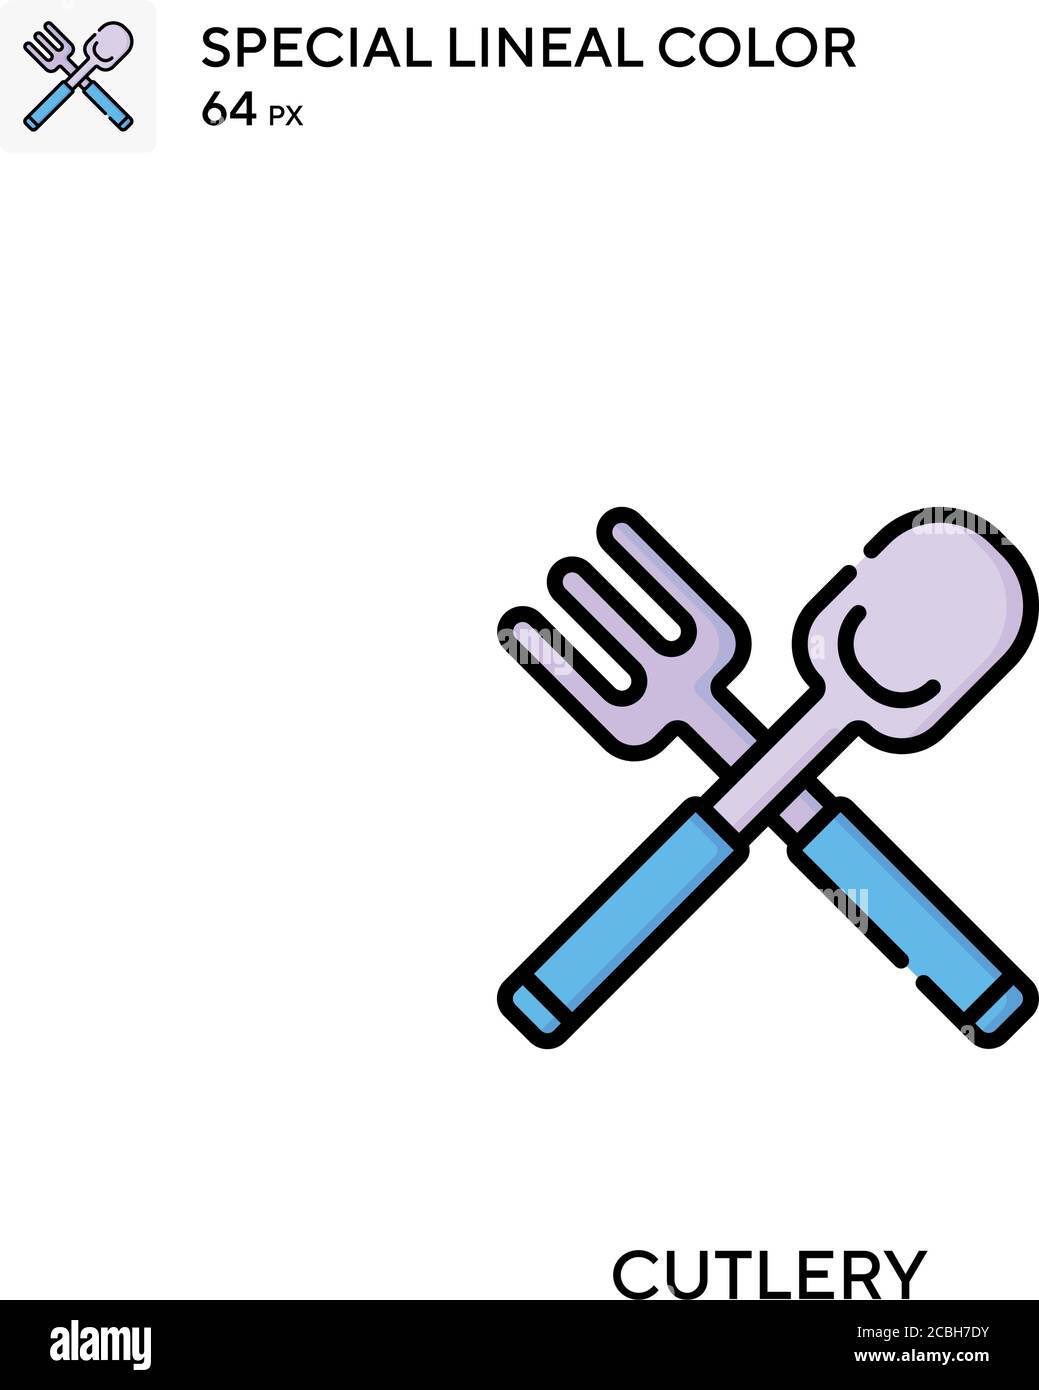 Cutlery special lineal color vector icon. Cutlery icons for your business project Stock Vector